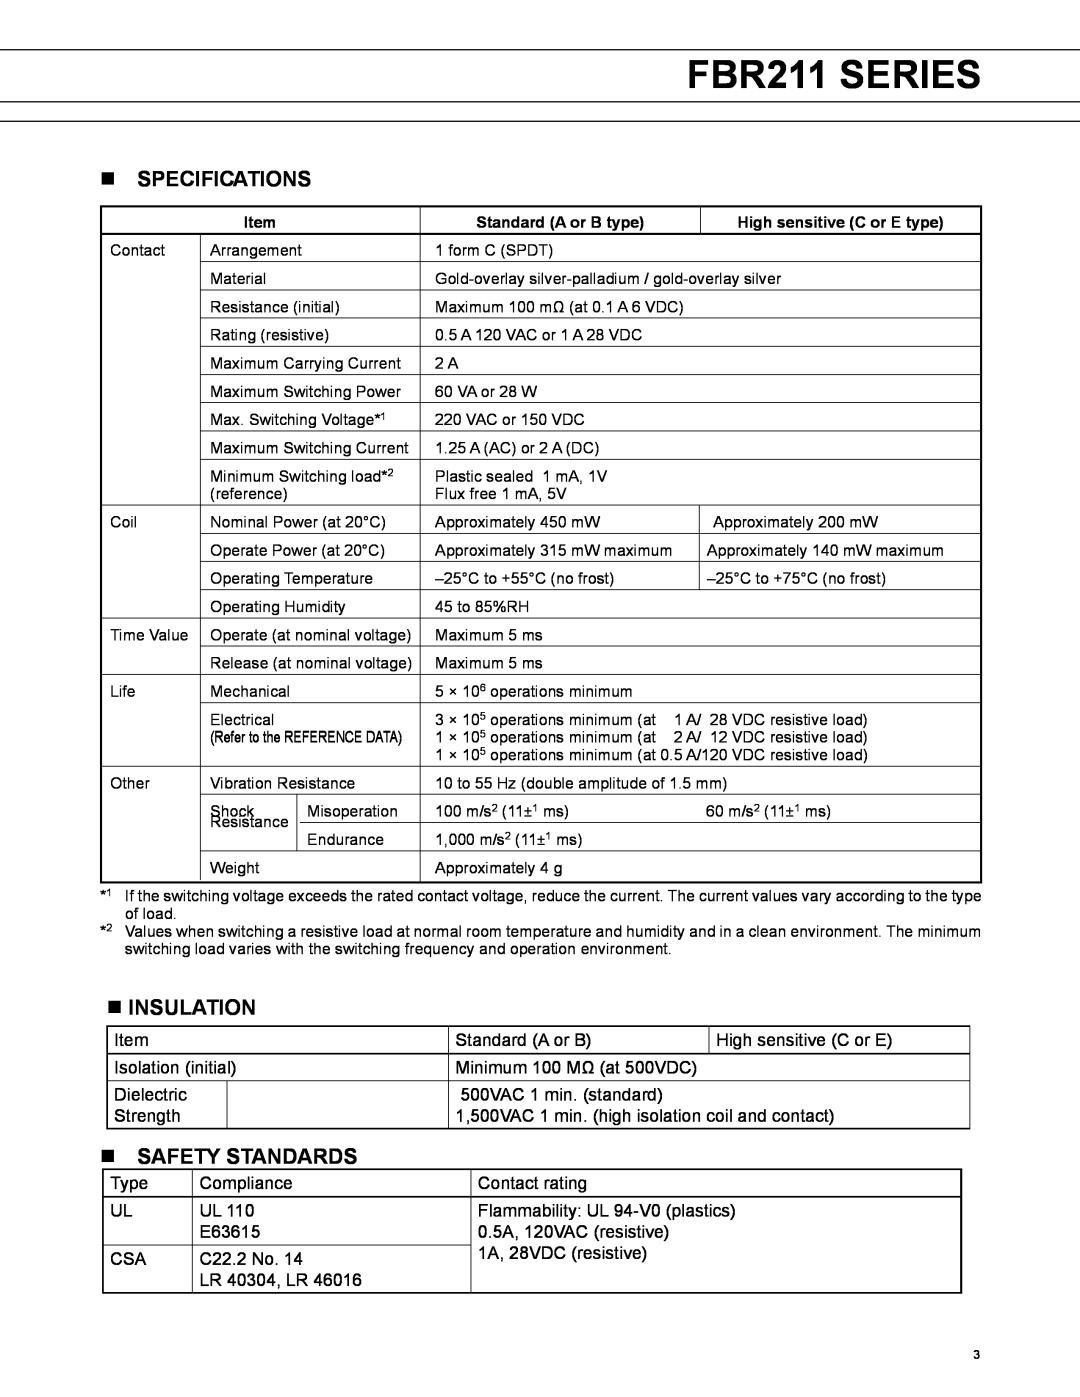 Fujitsu manual nSPECIFICATIONS, nINSULATION, nSAFETY STANDARDS, FBR211 SERIES 